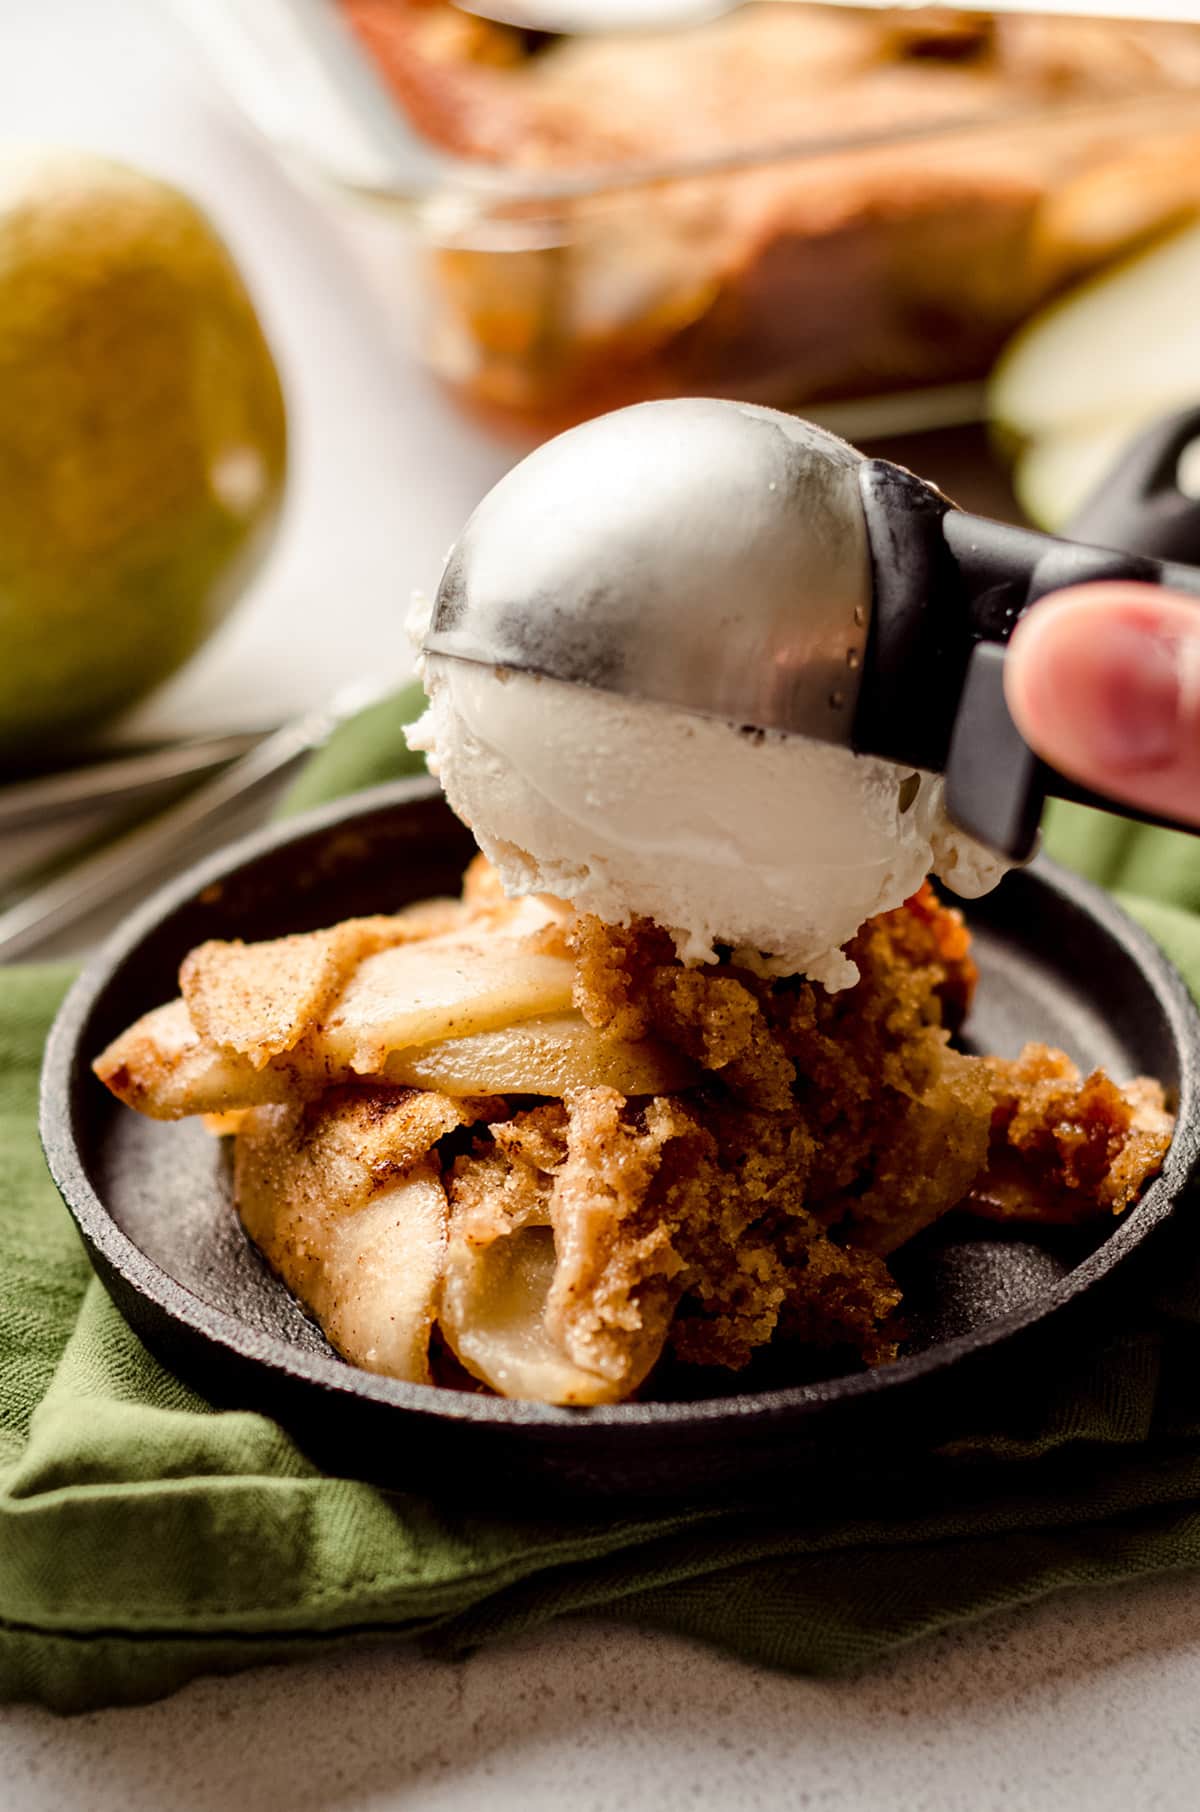 putting a scoop of ice cream on top of pear cobbler